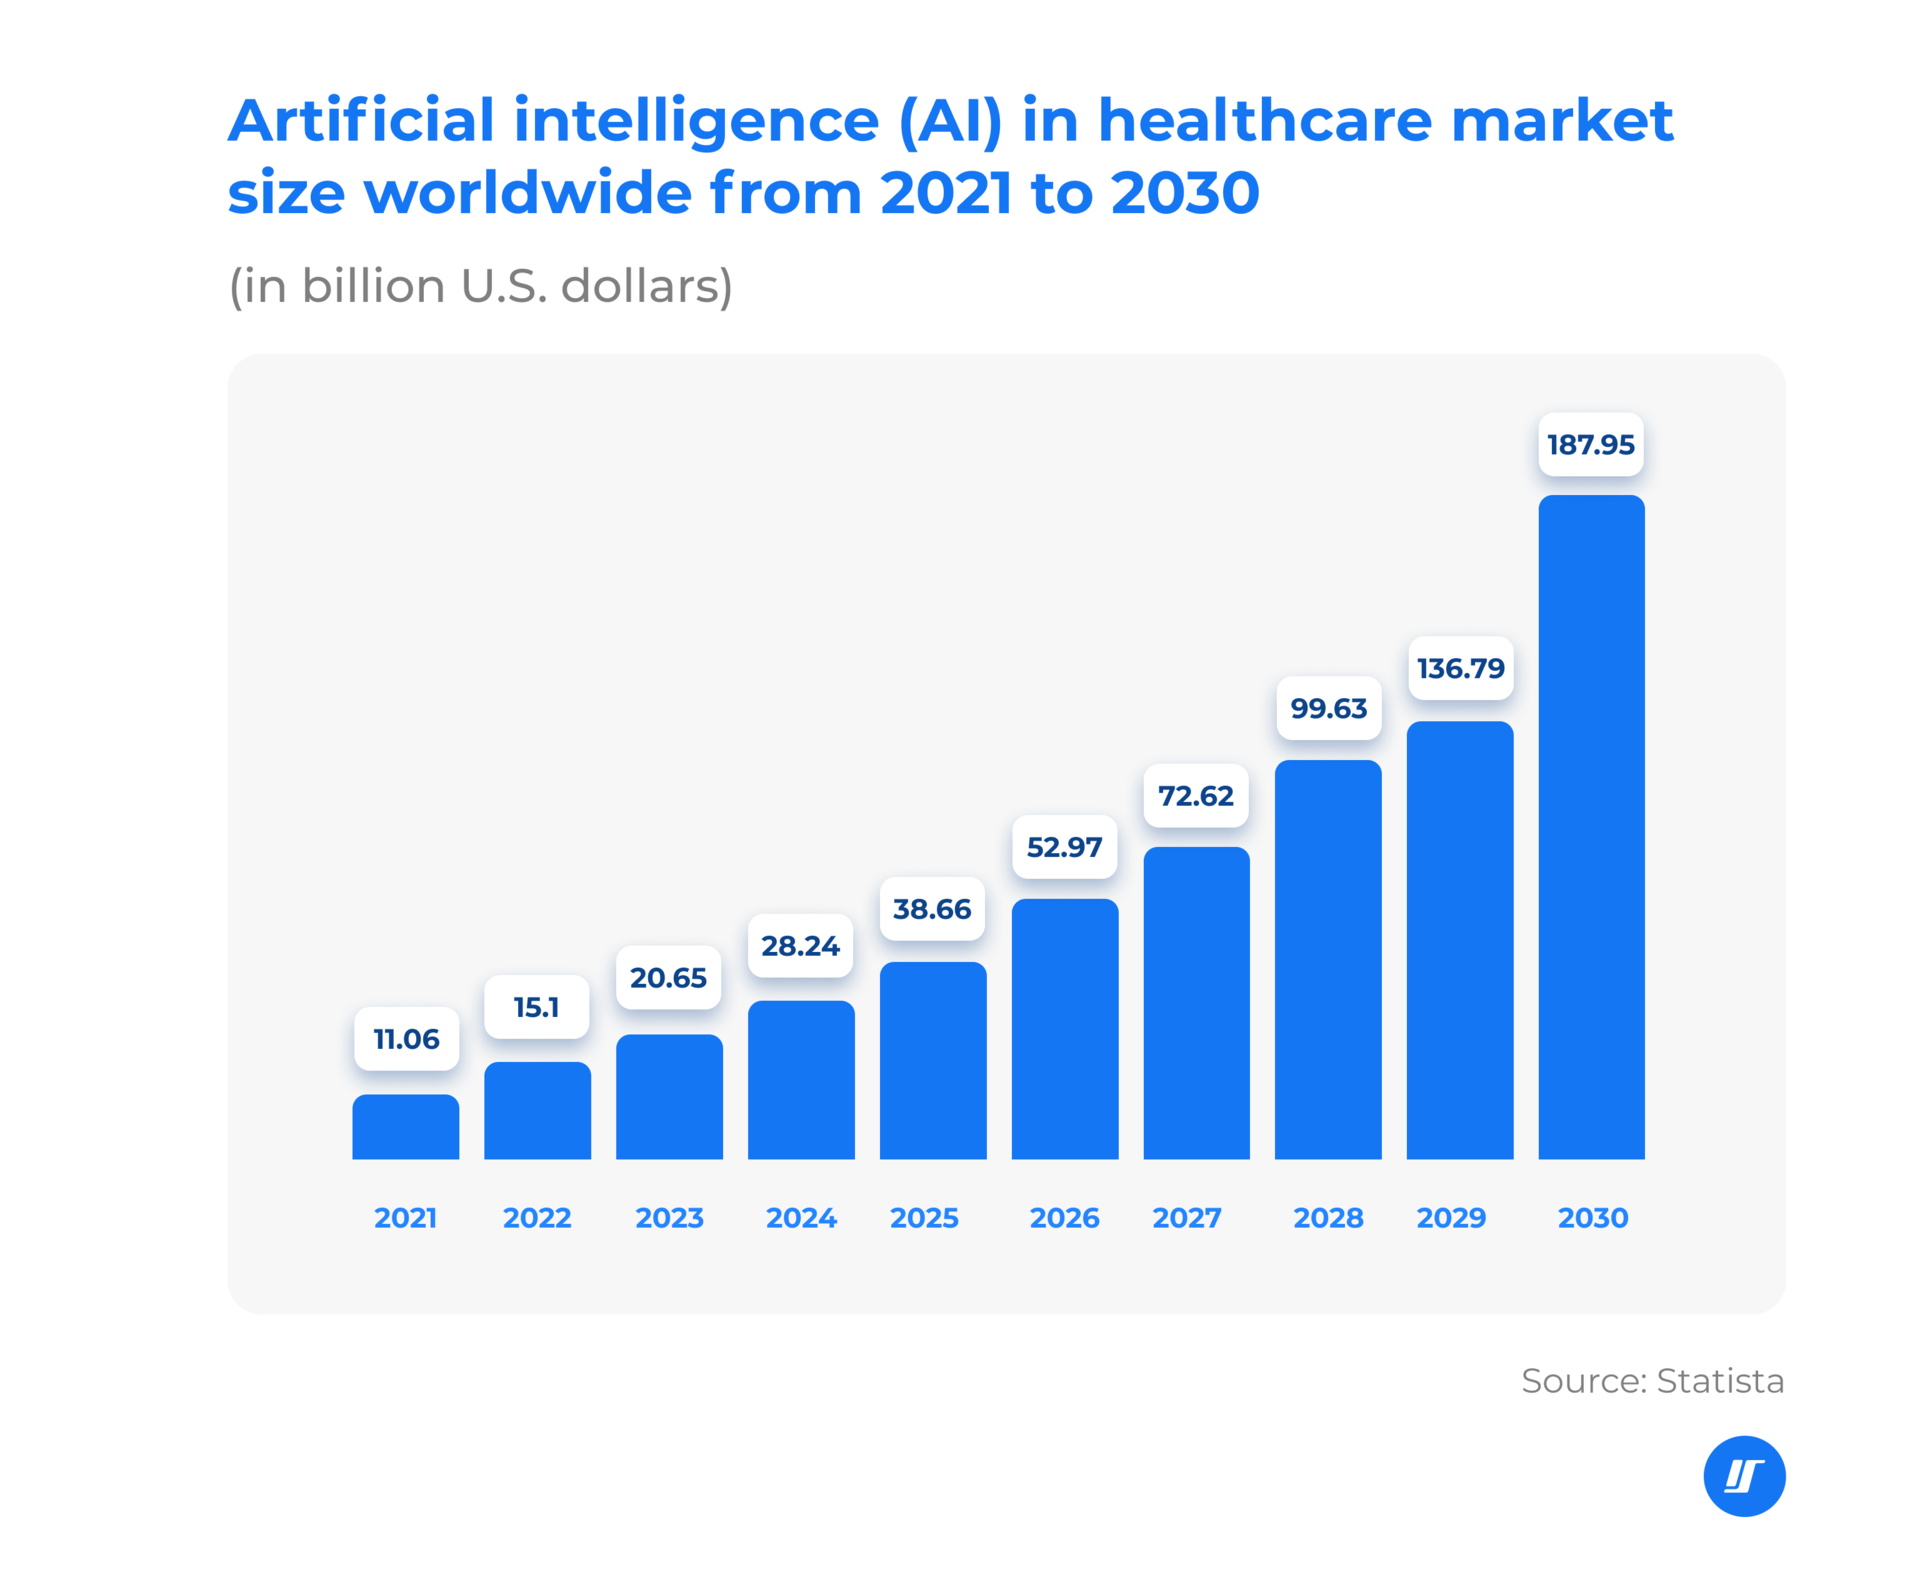 Chart of AI in healthcare market size worldwide